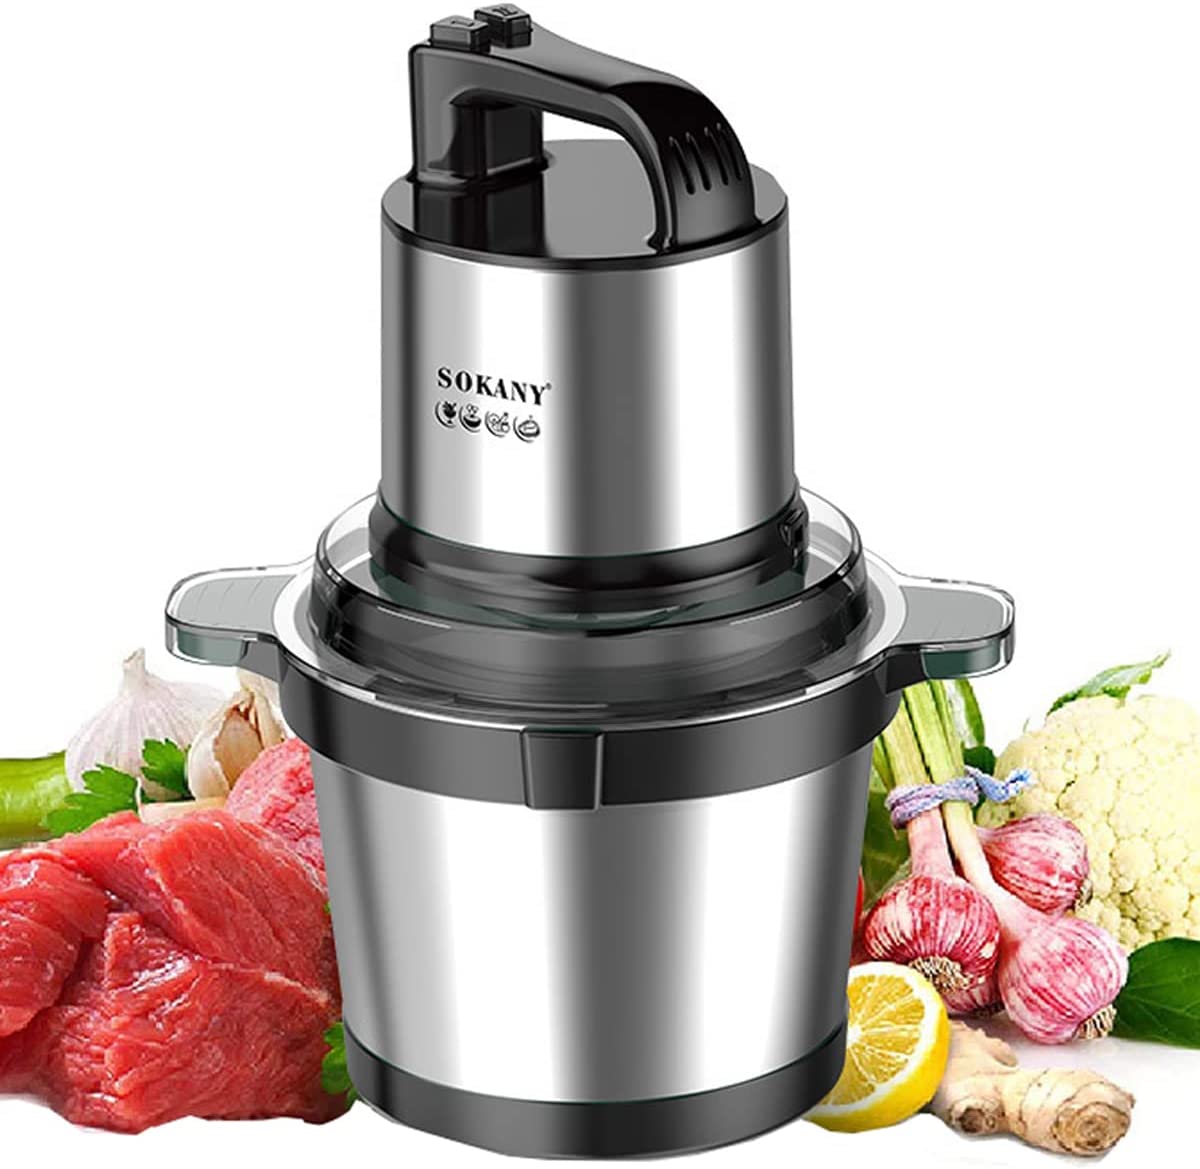 SOKANY 800 W Electric Kitchen Chopper with 4 L Stainless Steel Bowl, Multi Chopper with 2 Speed Levels, Meat Grinder with 4 Blades for Meat, Onions, Fruit, Vegetables